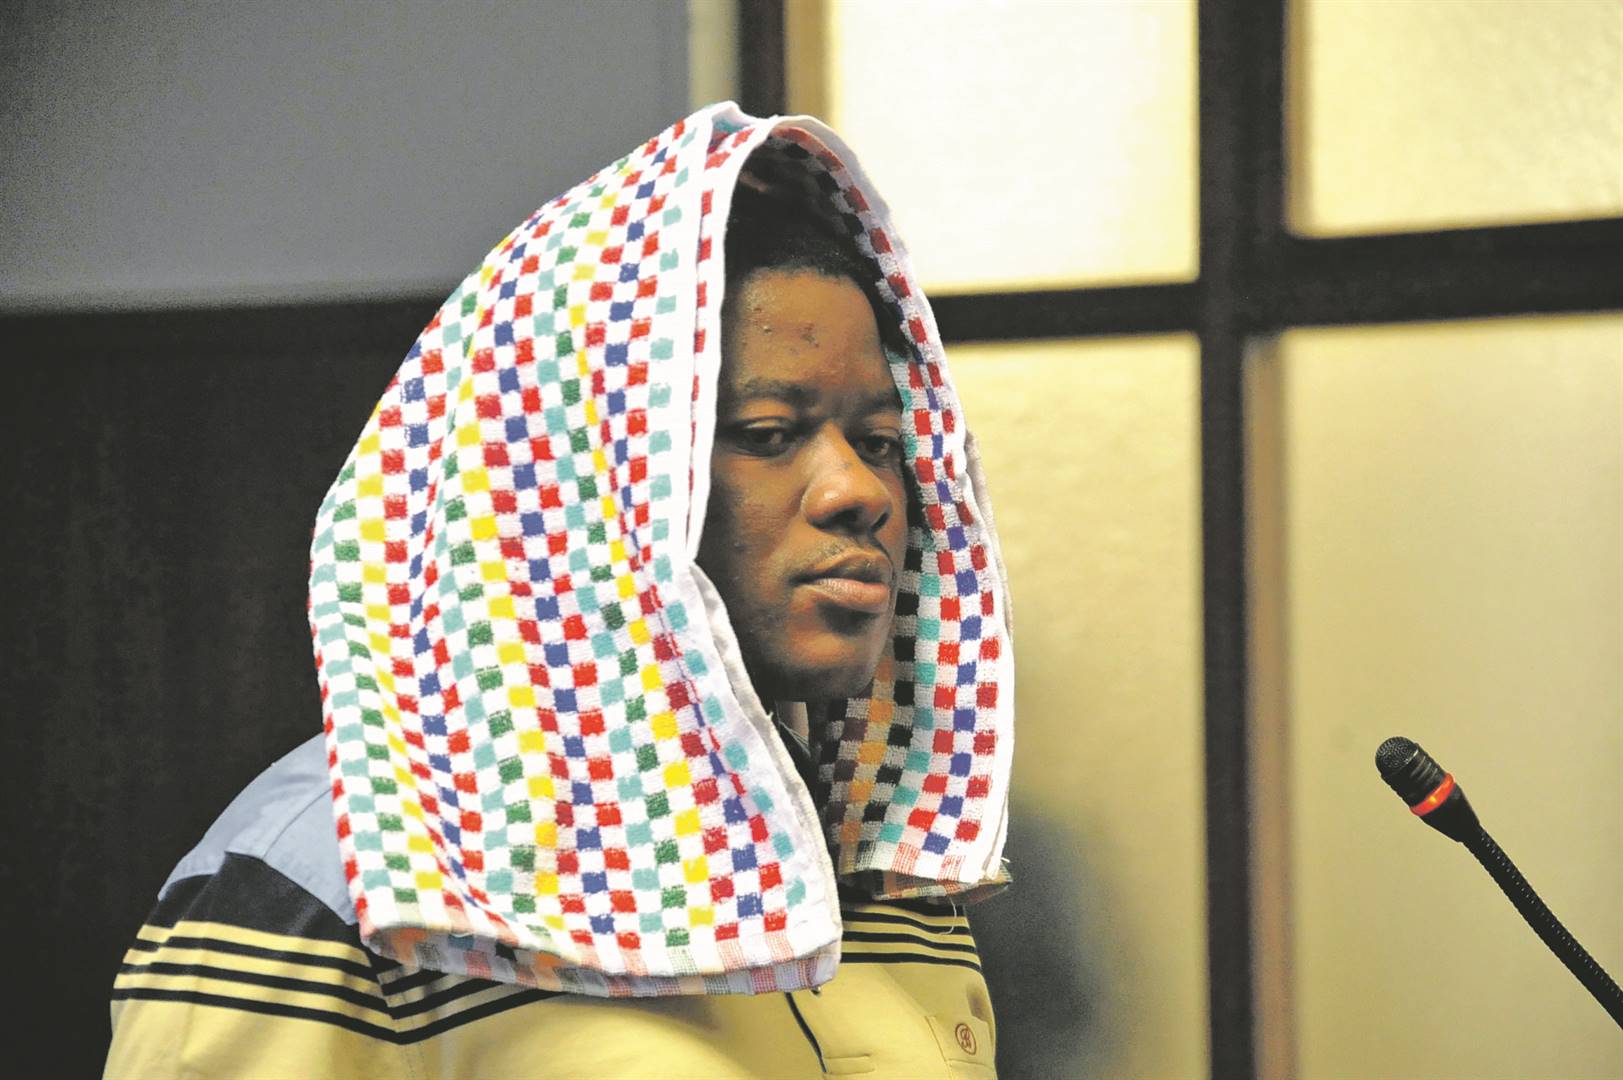 Bonginkosi Khanyile appears in the Durban Regional Court on Monday for charges that include incitement to commit public violence. Photo by Jabulani Langa